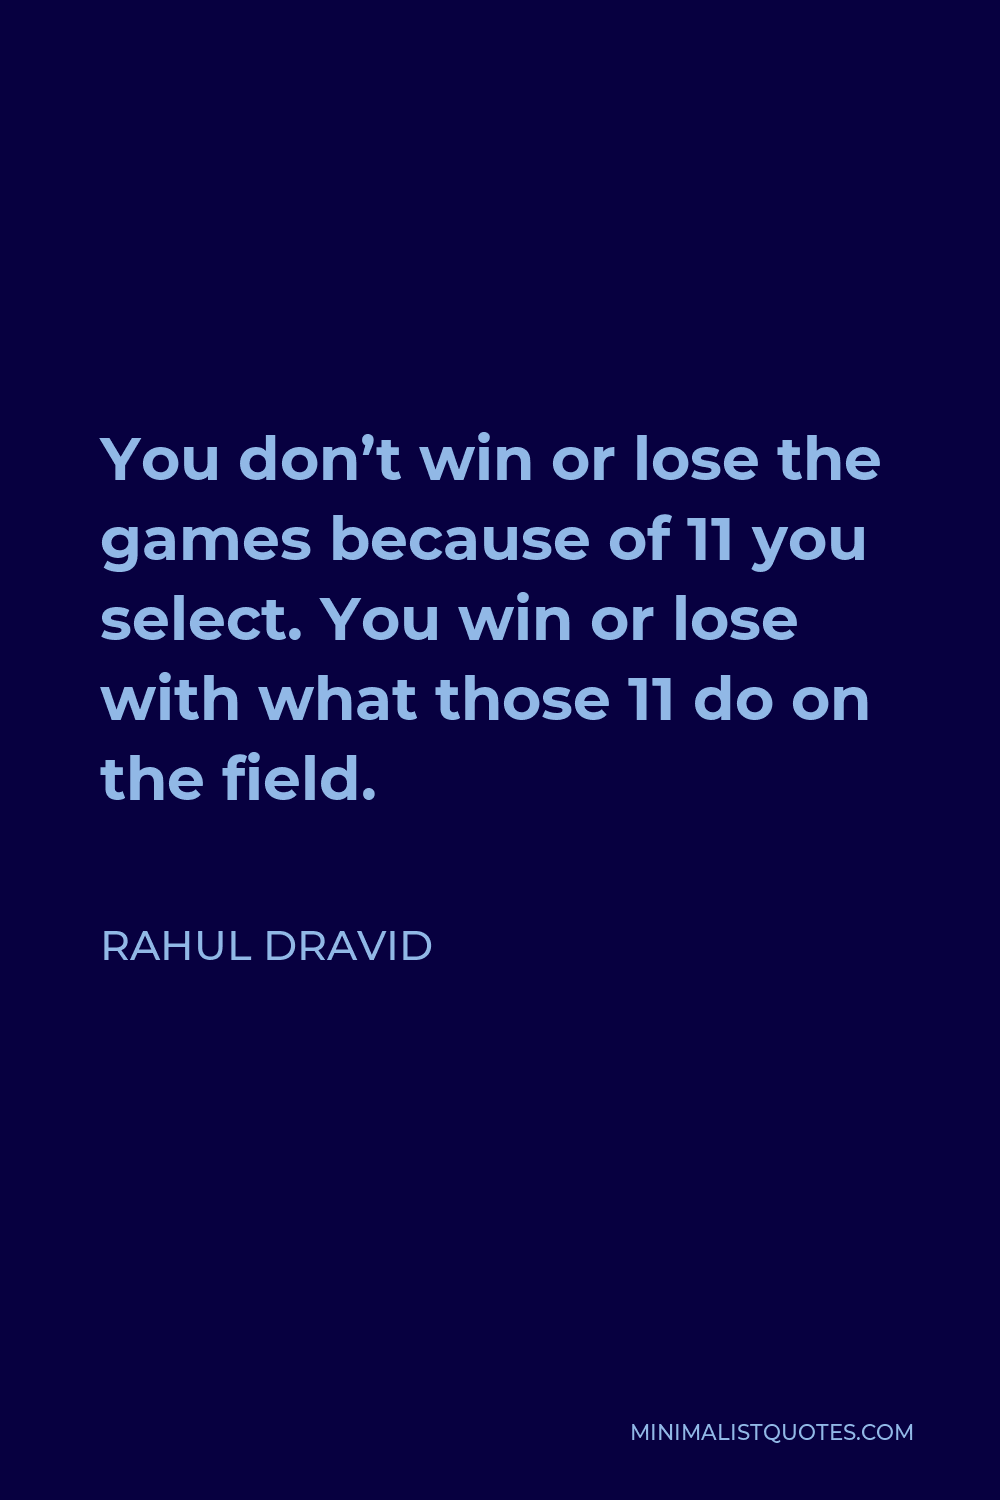 Rahul Dravid Quote - You don’t win or lose the games because of 11 you select. You win or lose with what those 11 do on the field.